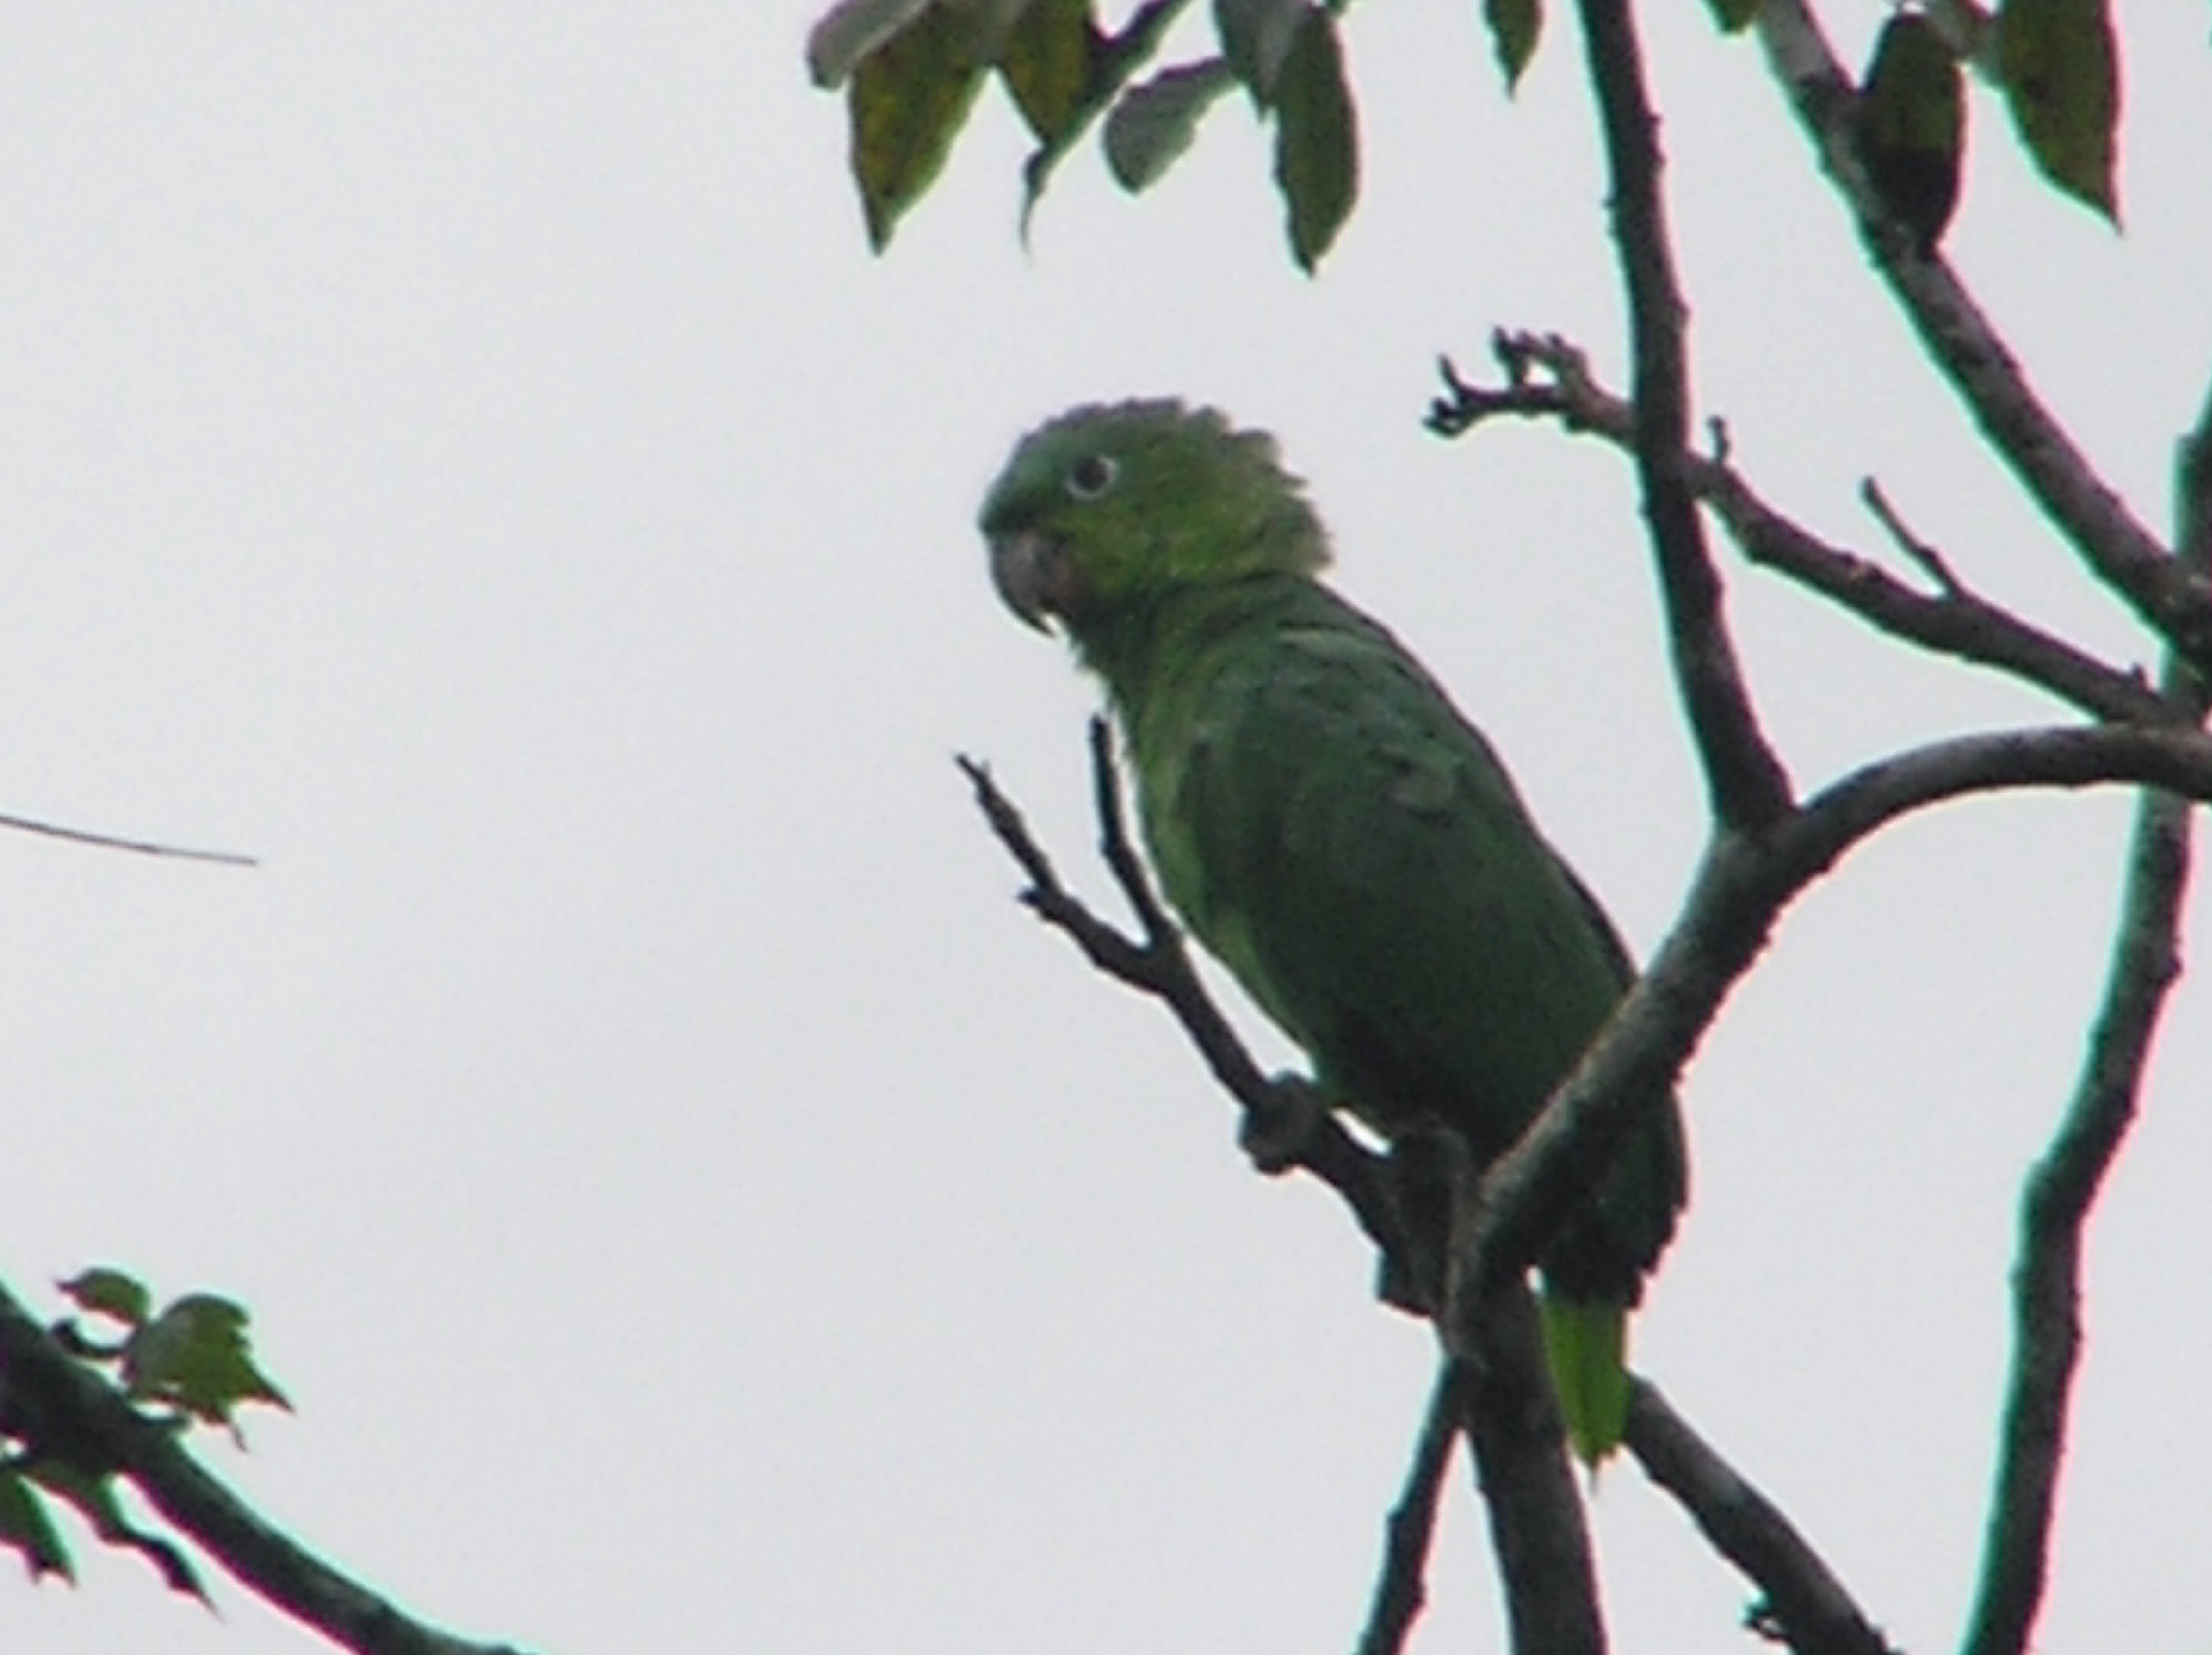 Click picture to see more Mealy Parrot photos.